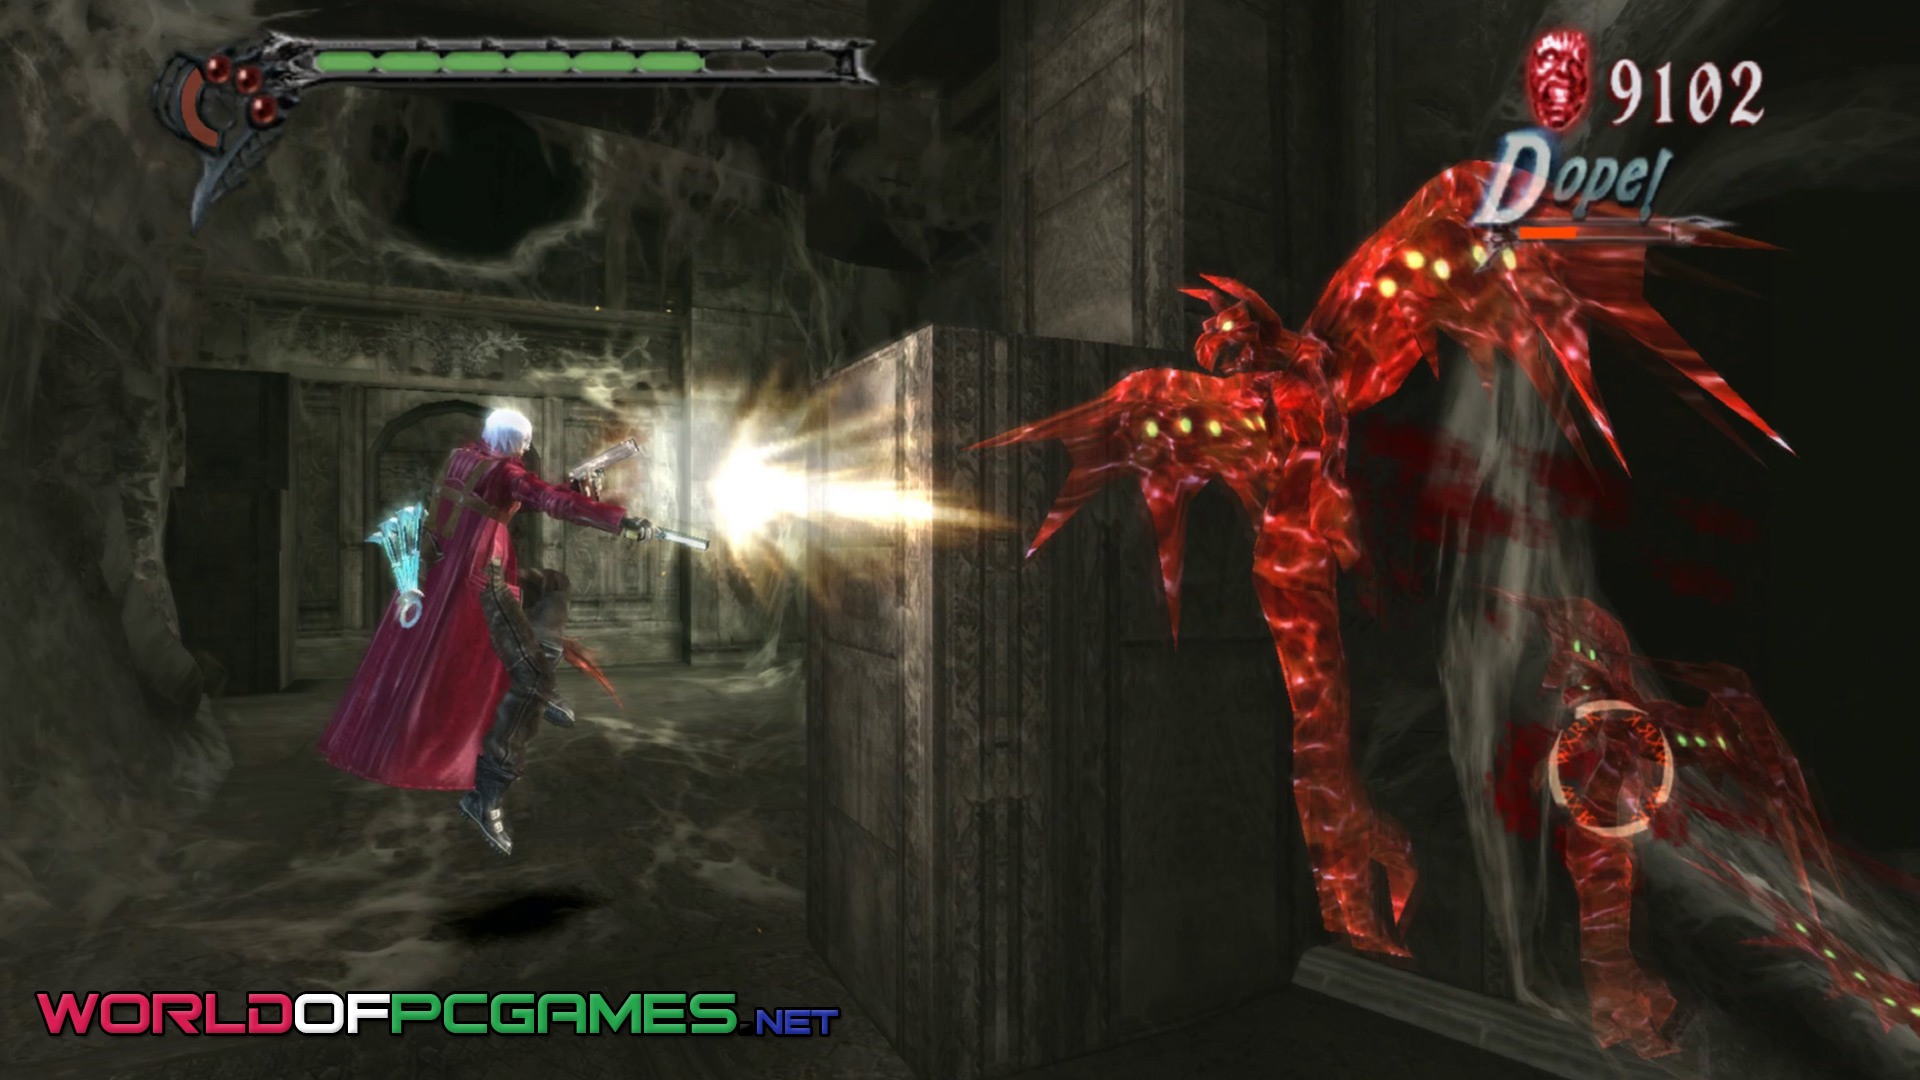 Devil May Cry 3 Free Download Special Edition PC Game By worldof-pcgames.netm